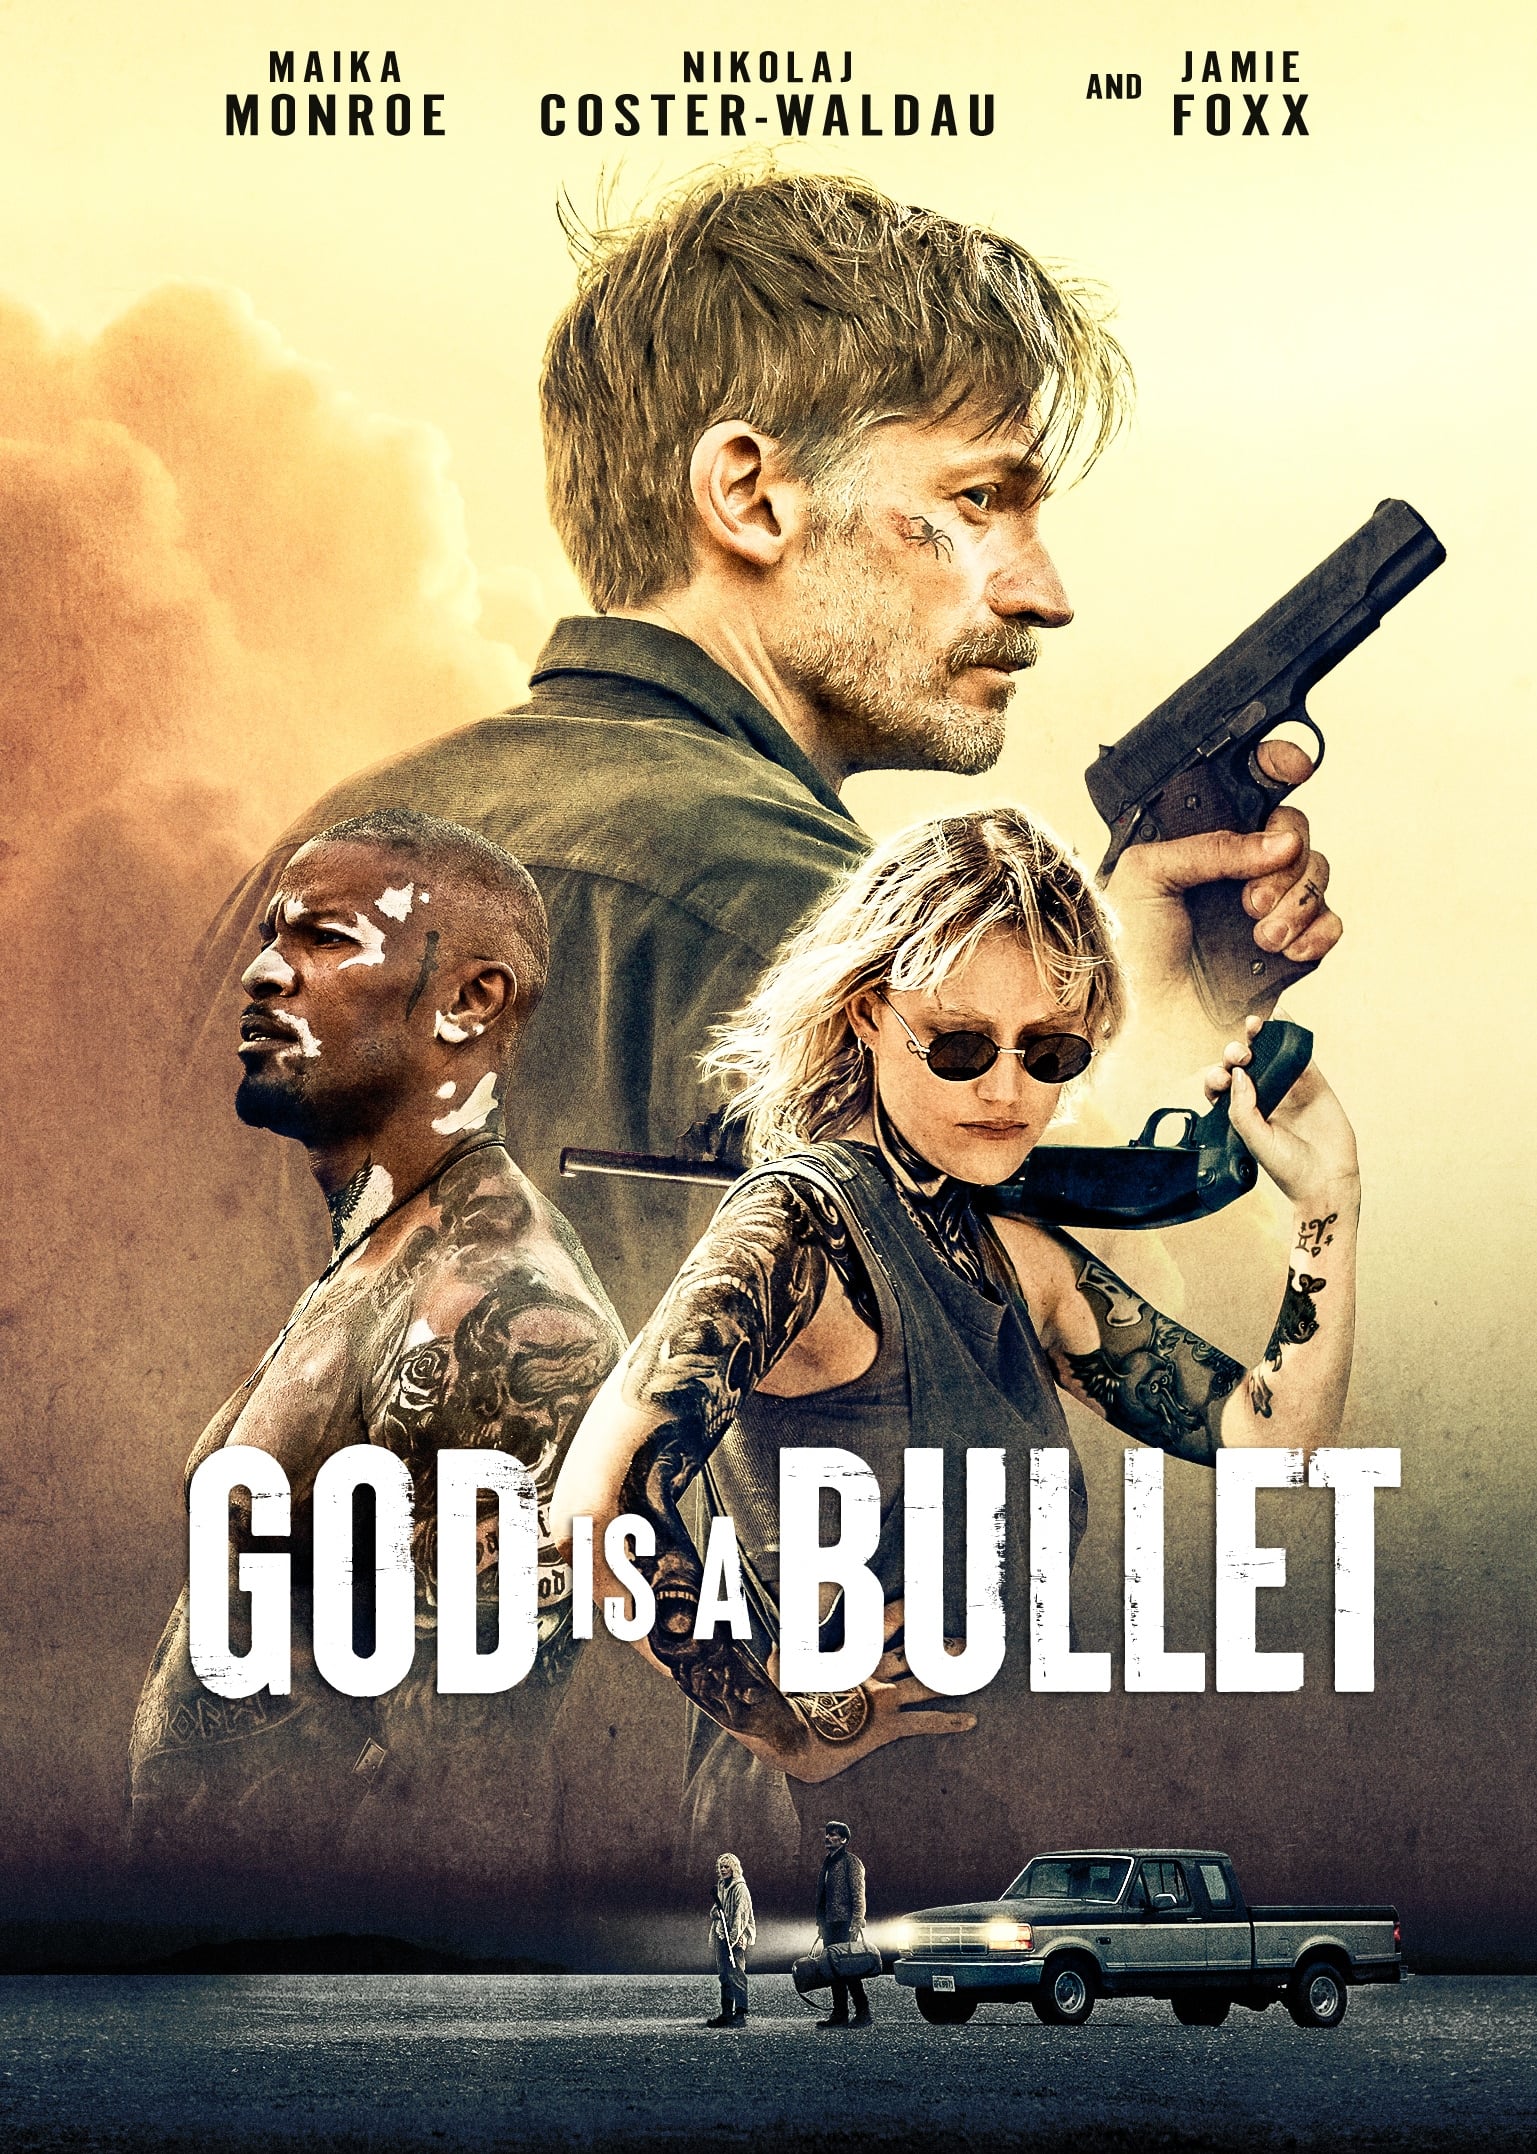 movie review god is a bullet